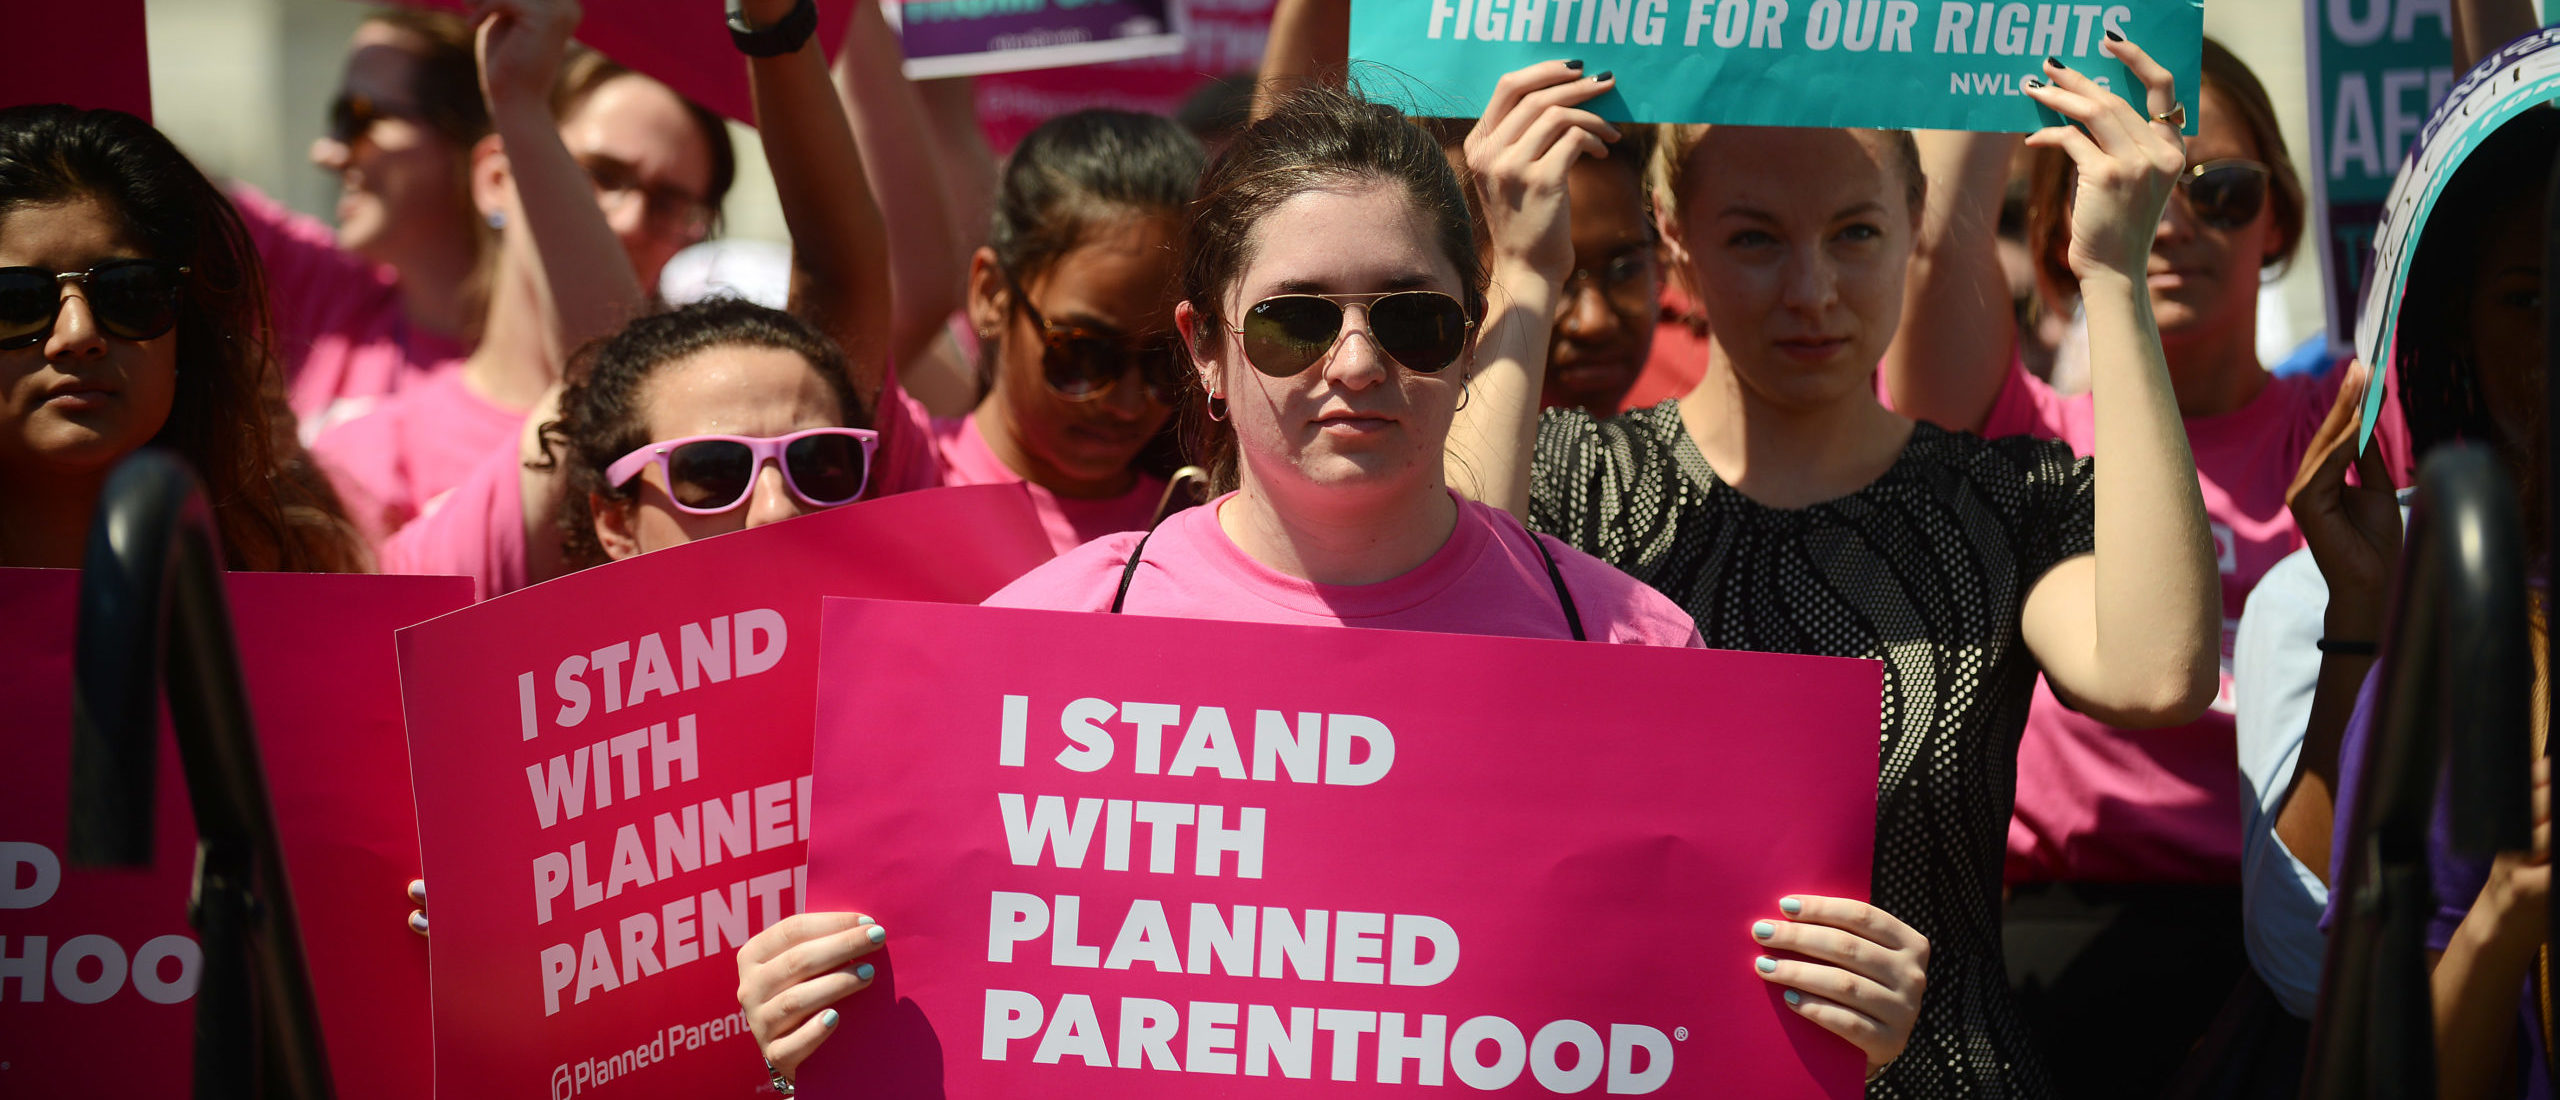 WASHINGTON, DC - JUNE 21: Protesters hold posters in support of Planned Parenthood at a rally to oppose the repeal of the Affordable Care Act and its replacement on Capitol Hill on June 21, 2017 in Washington, DC. Criticism is mounting on the GOP for health care reform legislation being done behind closed doors. (Photo by Astrid Riecken/Getty Images)